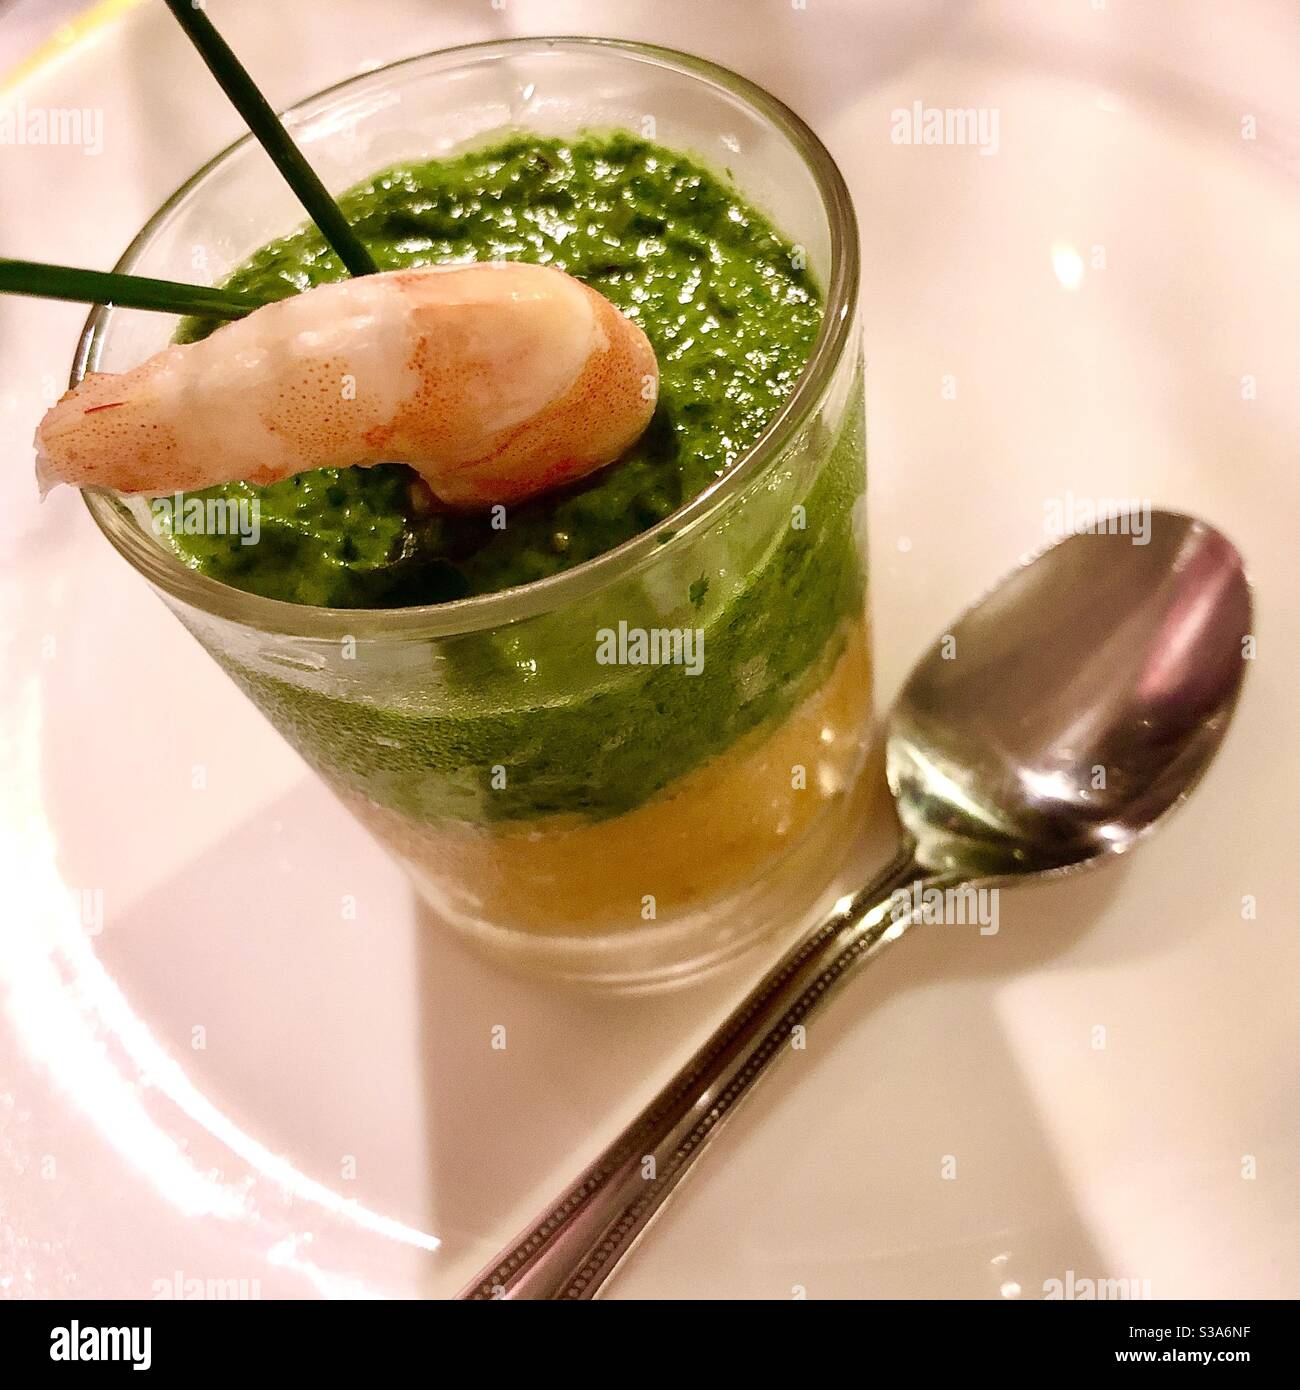 An “amuse-bouche” or “amuse-gueule” appetizer made with a shrimp and carrot purée base and spinach and avocado purée topping. Stock Photo